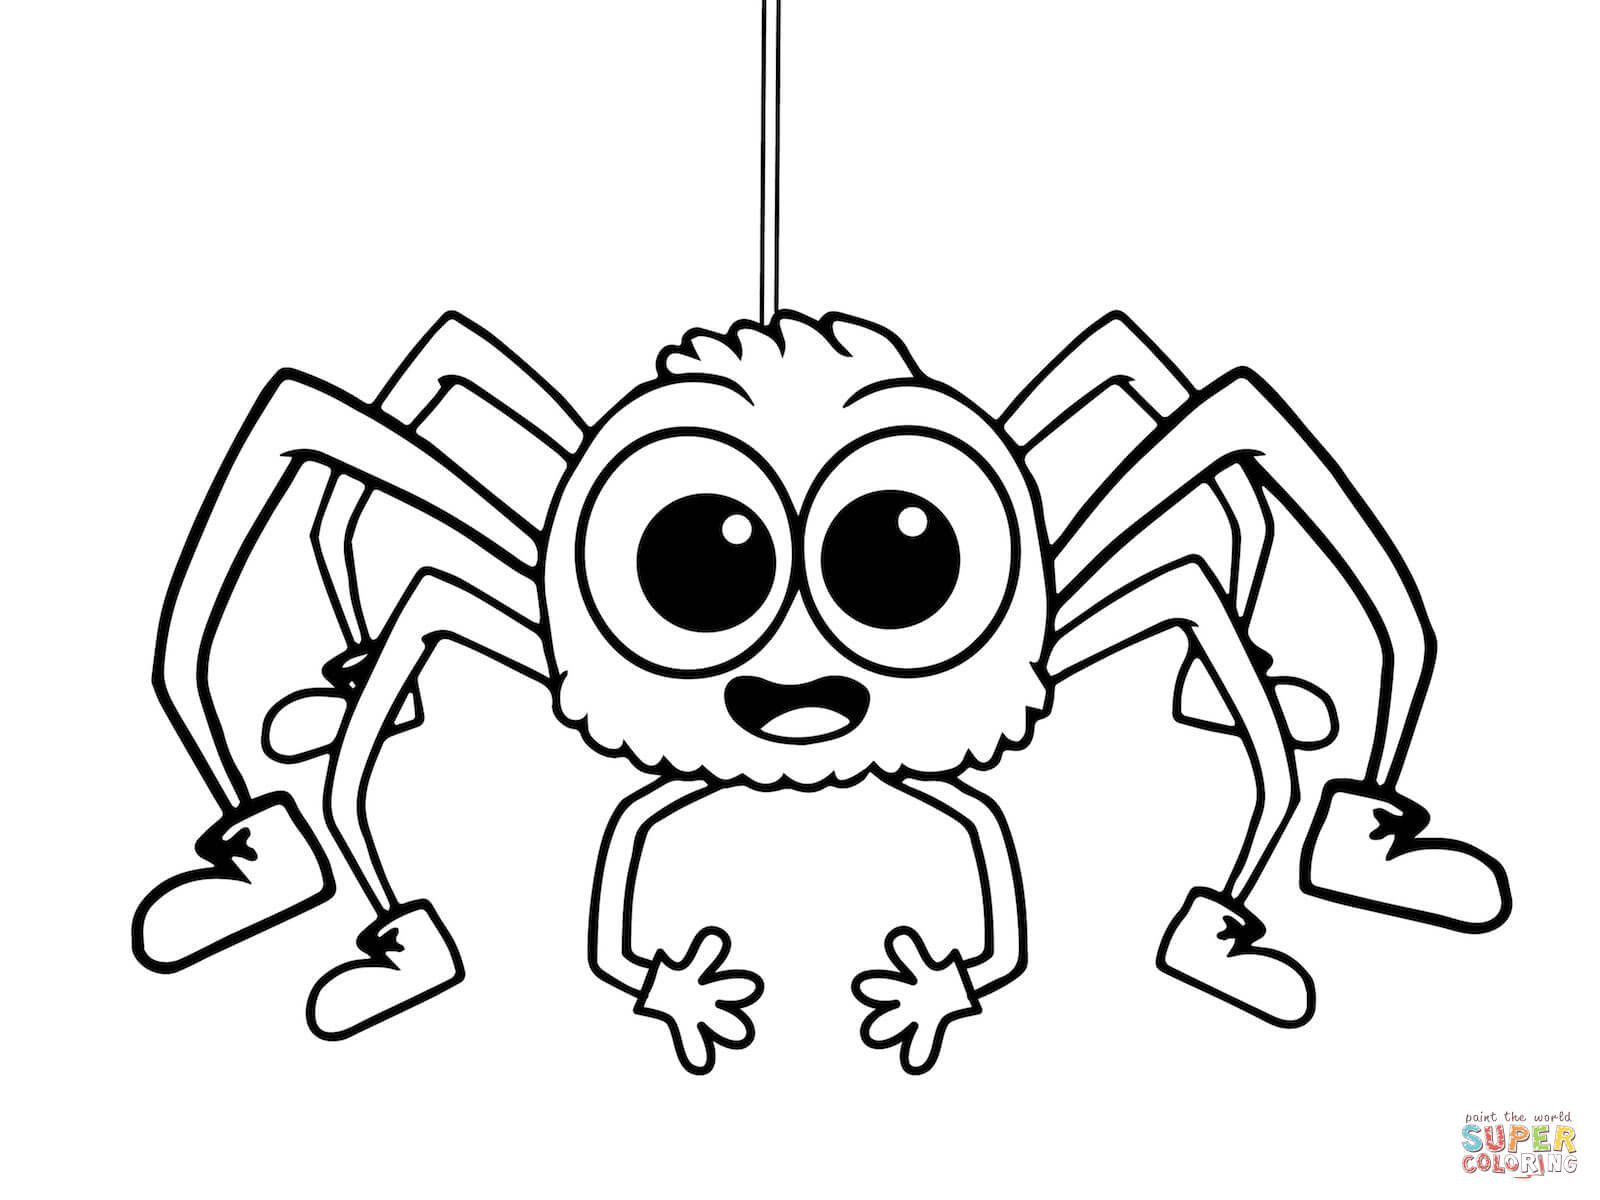 Itsy Bitsy Spider Coloring Page